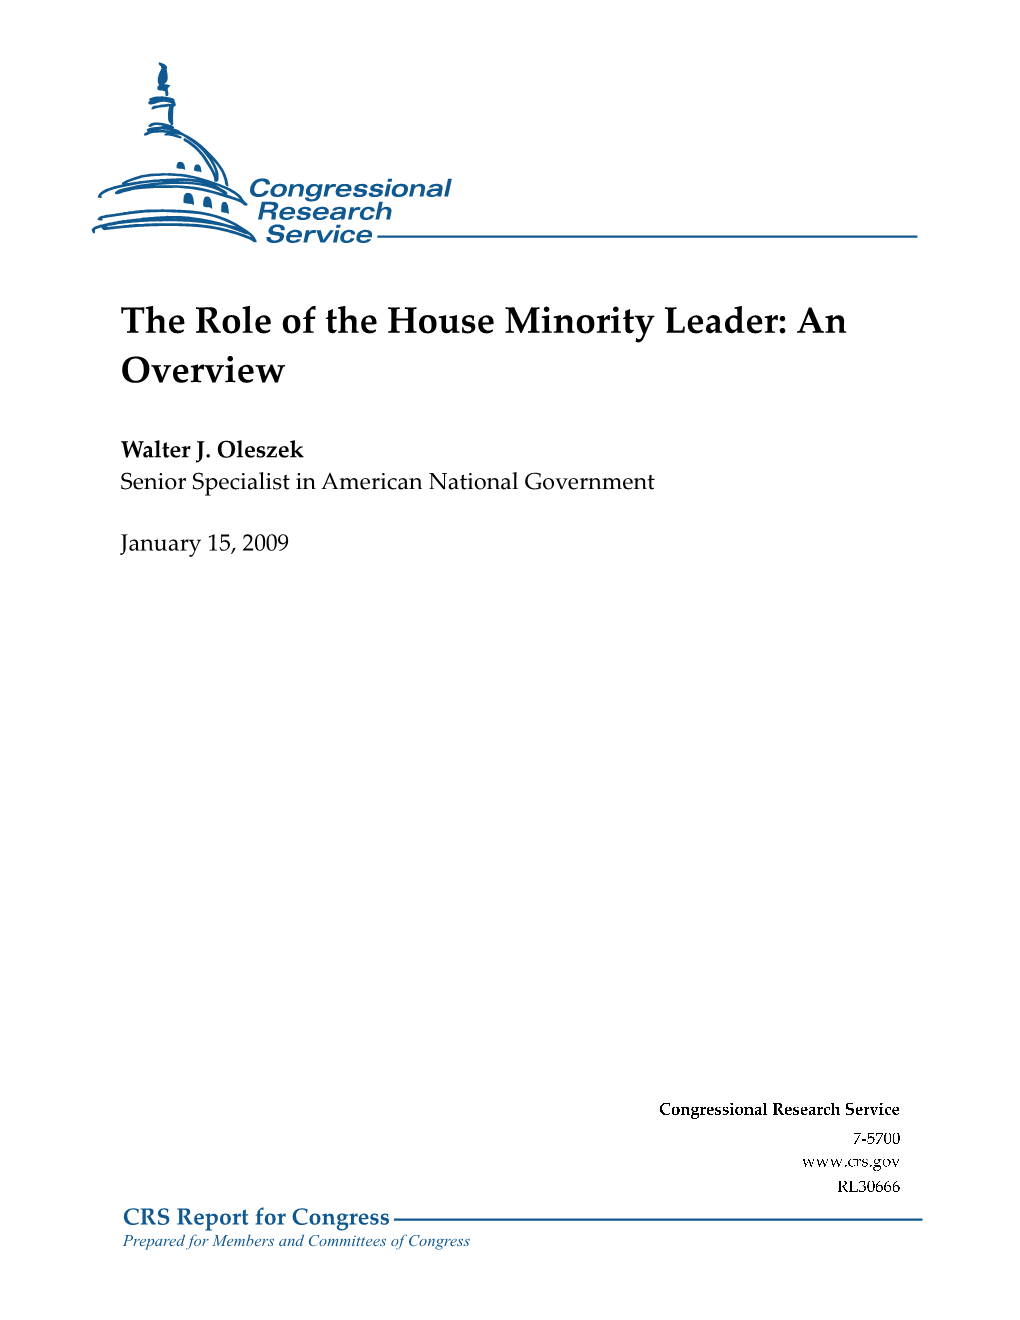 The Role of the House Minority Leader